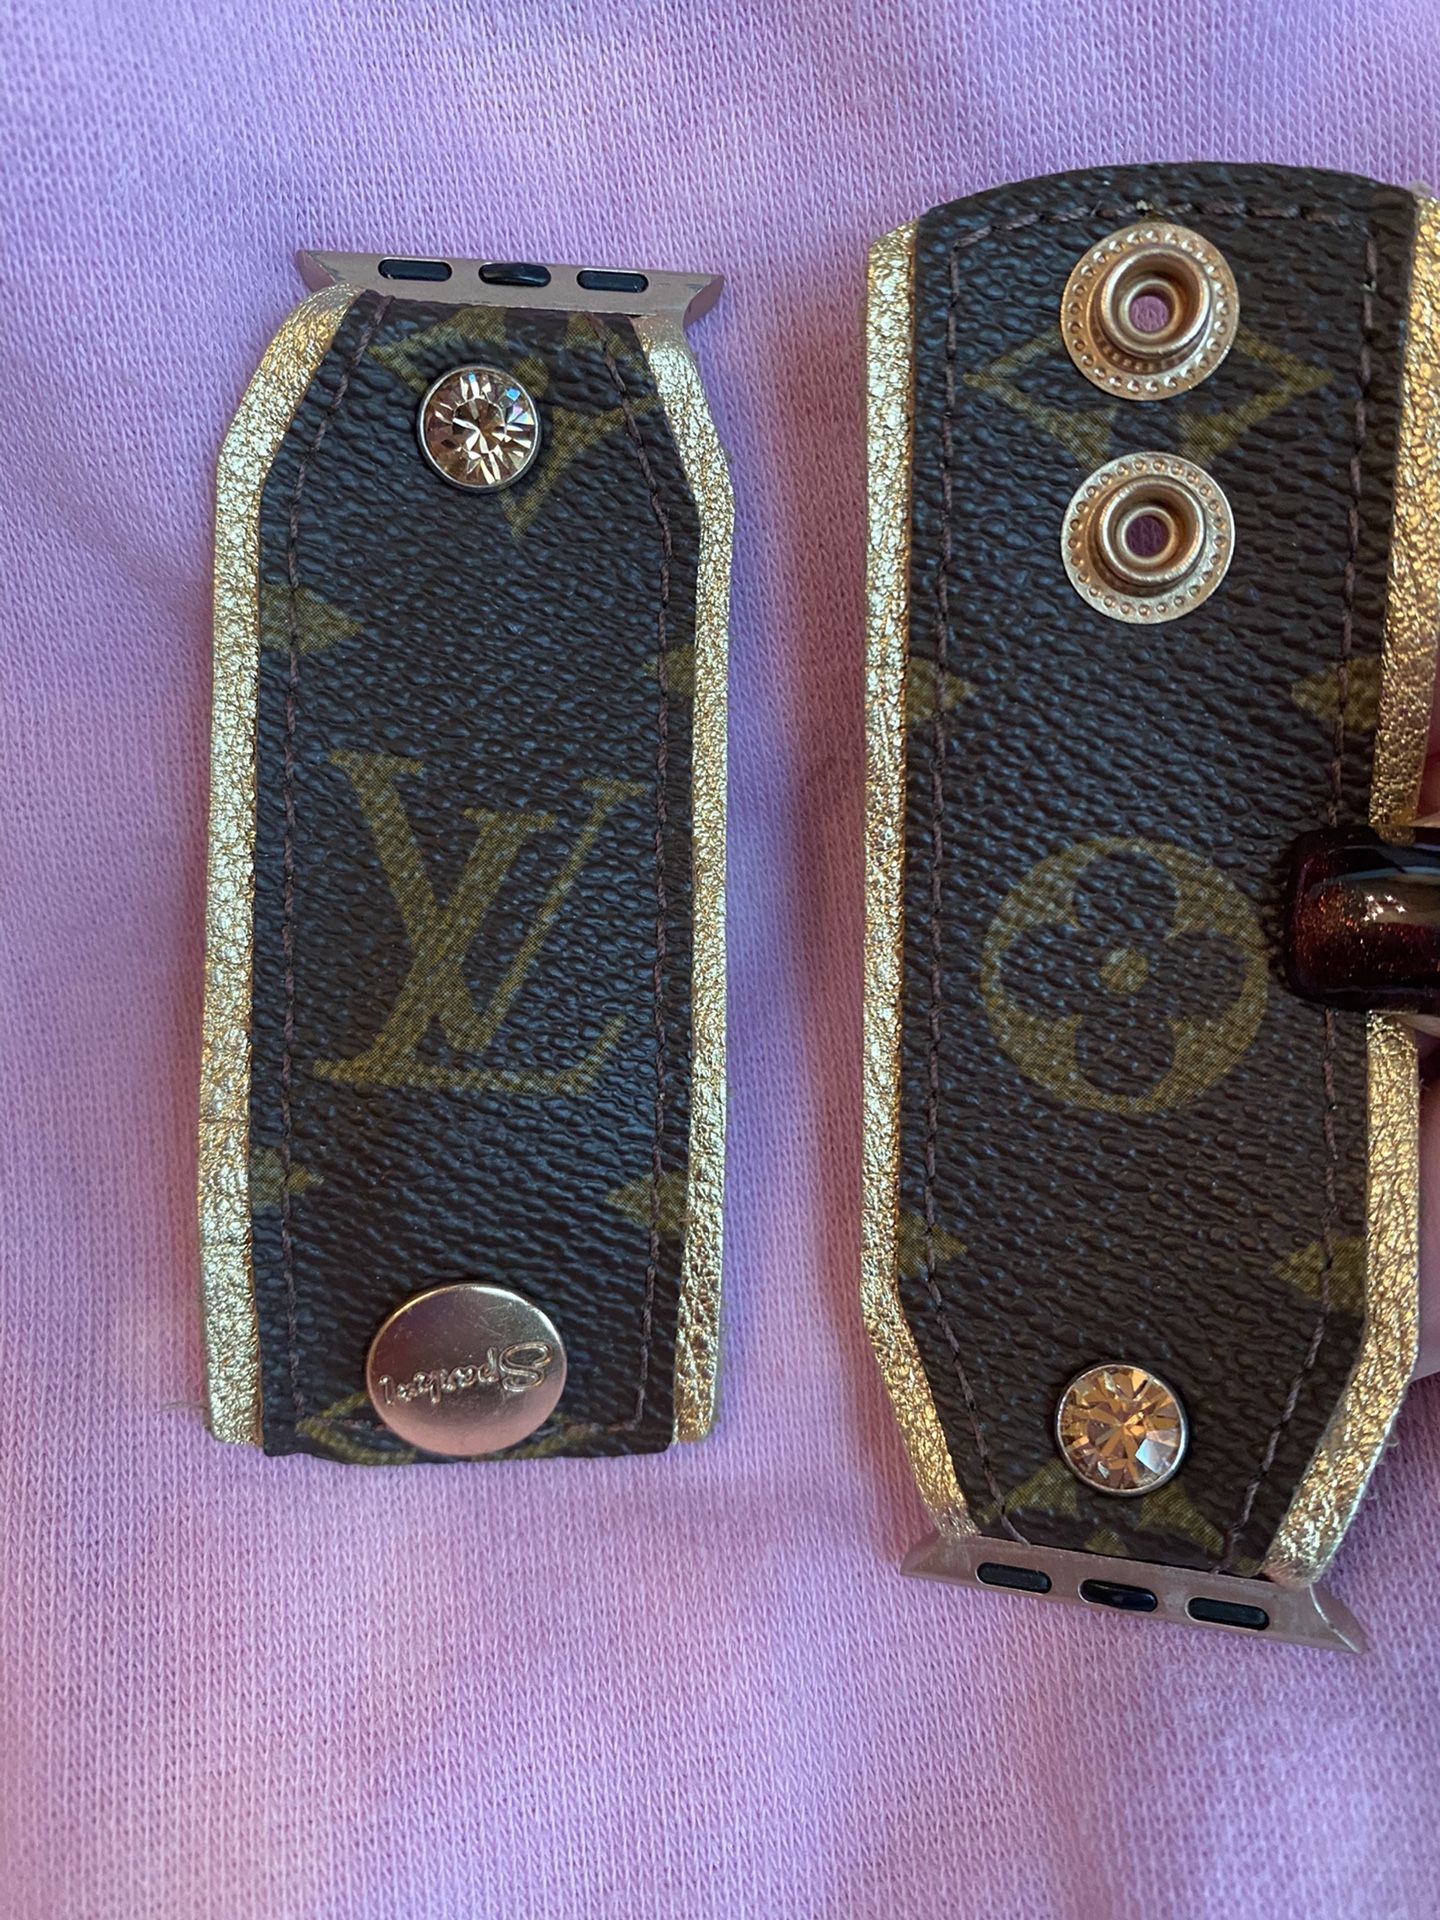 Upcycled Louis Vuitton Band Watch